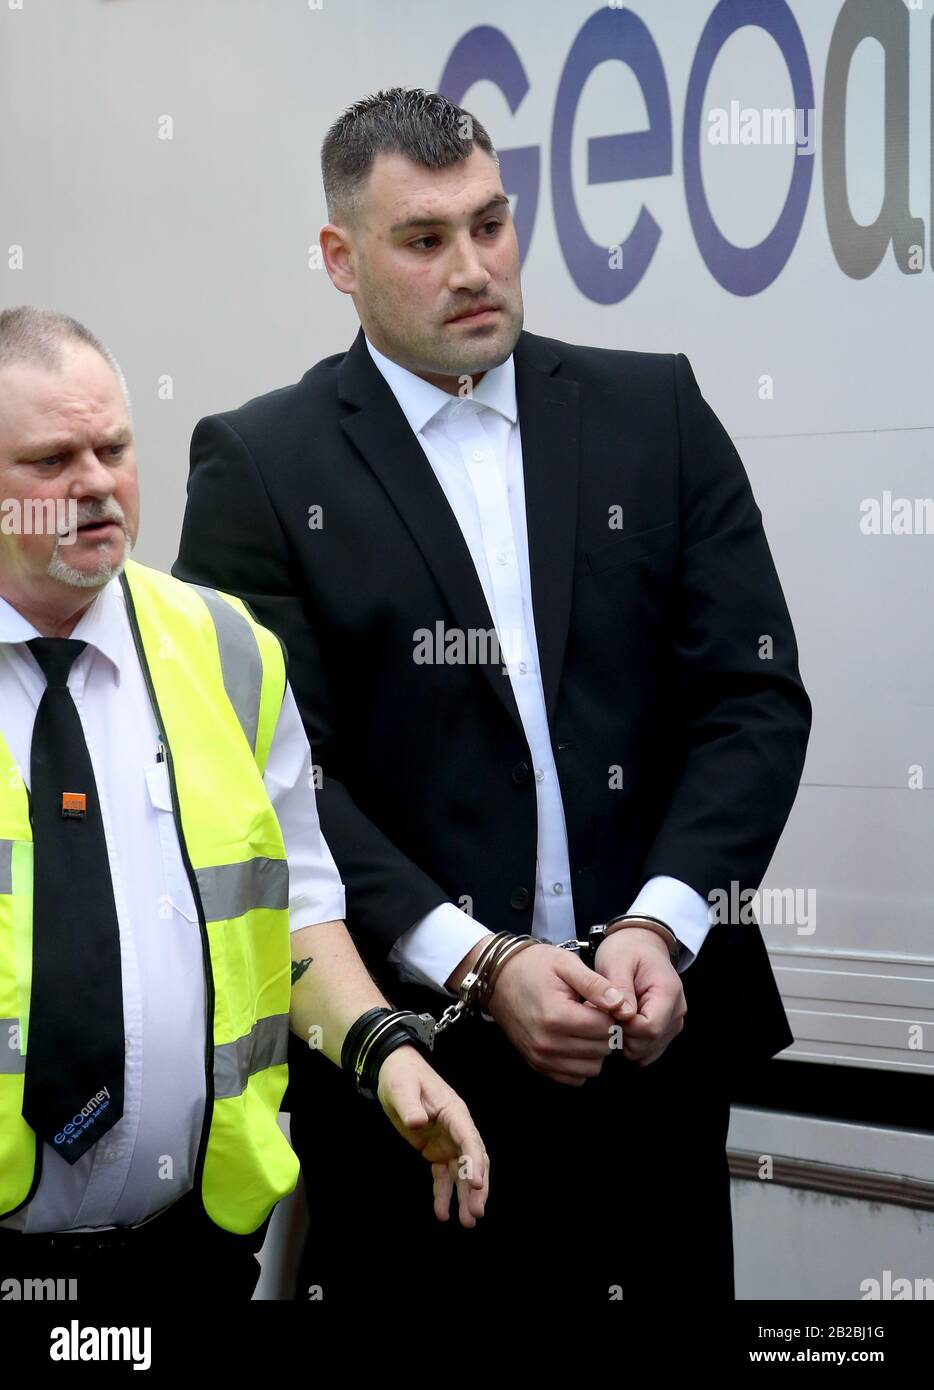 Michael Roe arriving at Lewes Crown Court where he is charged with the murder of a child under one year old between September 8 and 11 2018; wounding or inflicting grievous bodily harm without intent and causing or allowing the death of a child, in connection with the death of his daughter, Holly. Stock Photo